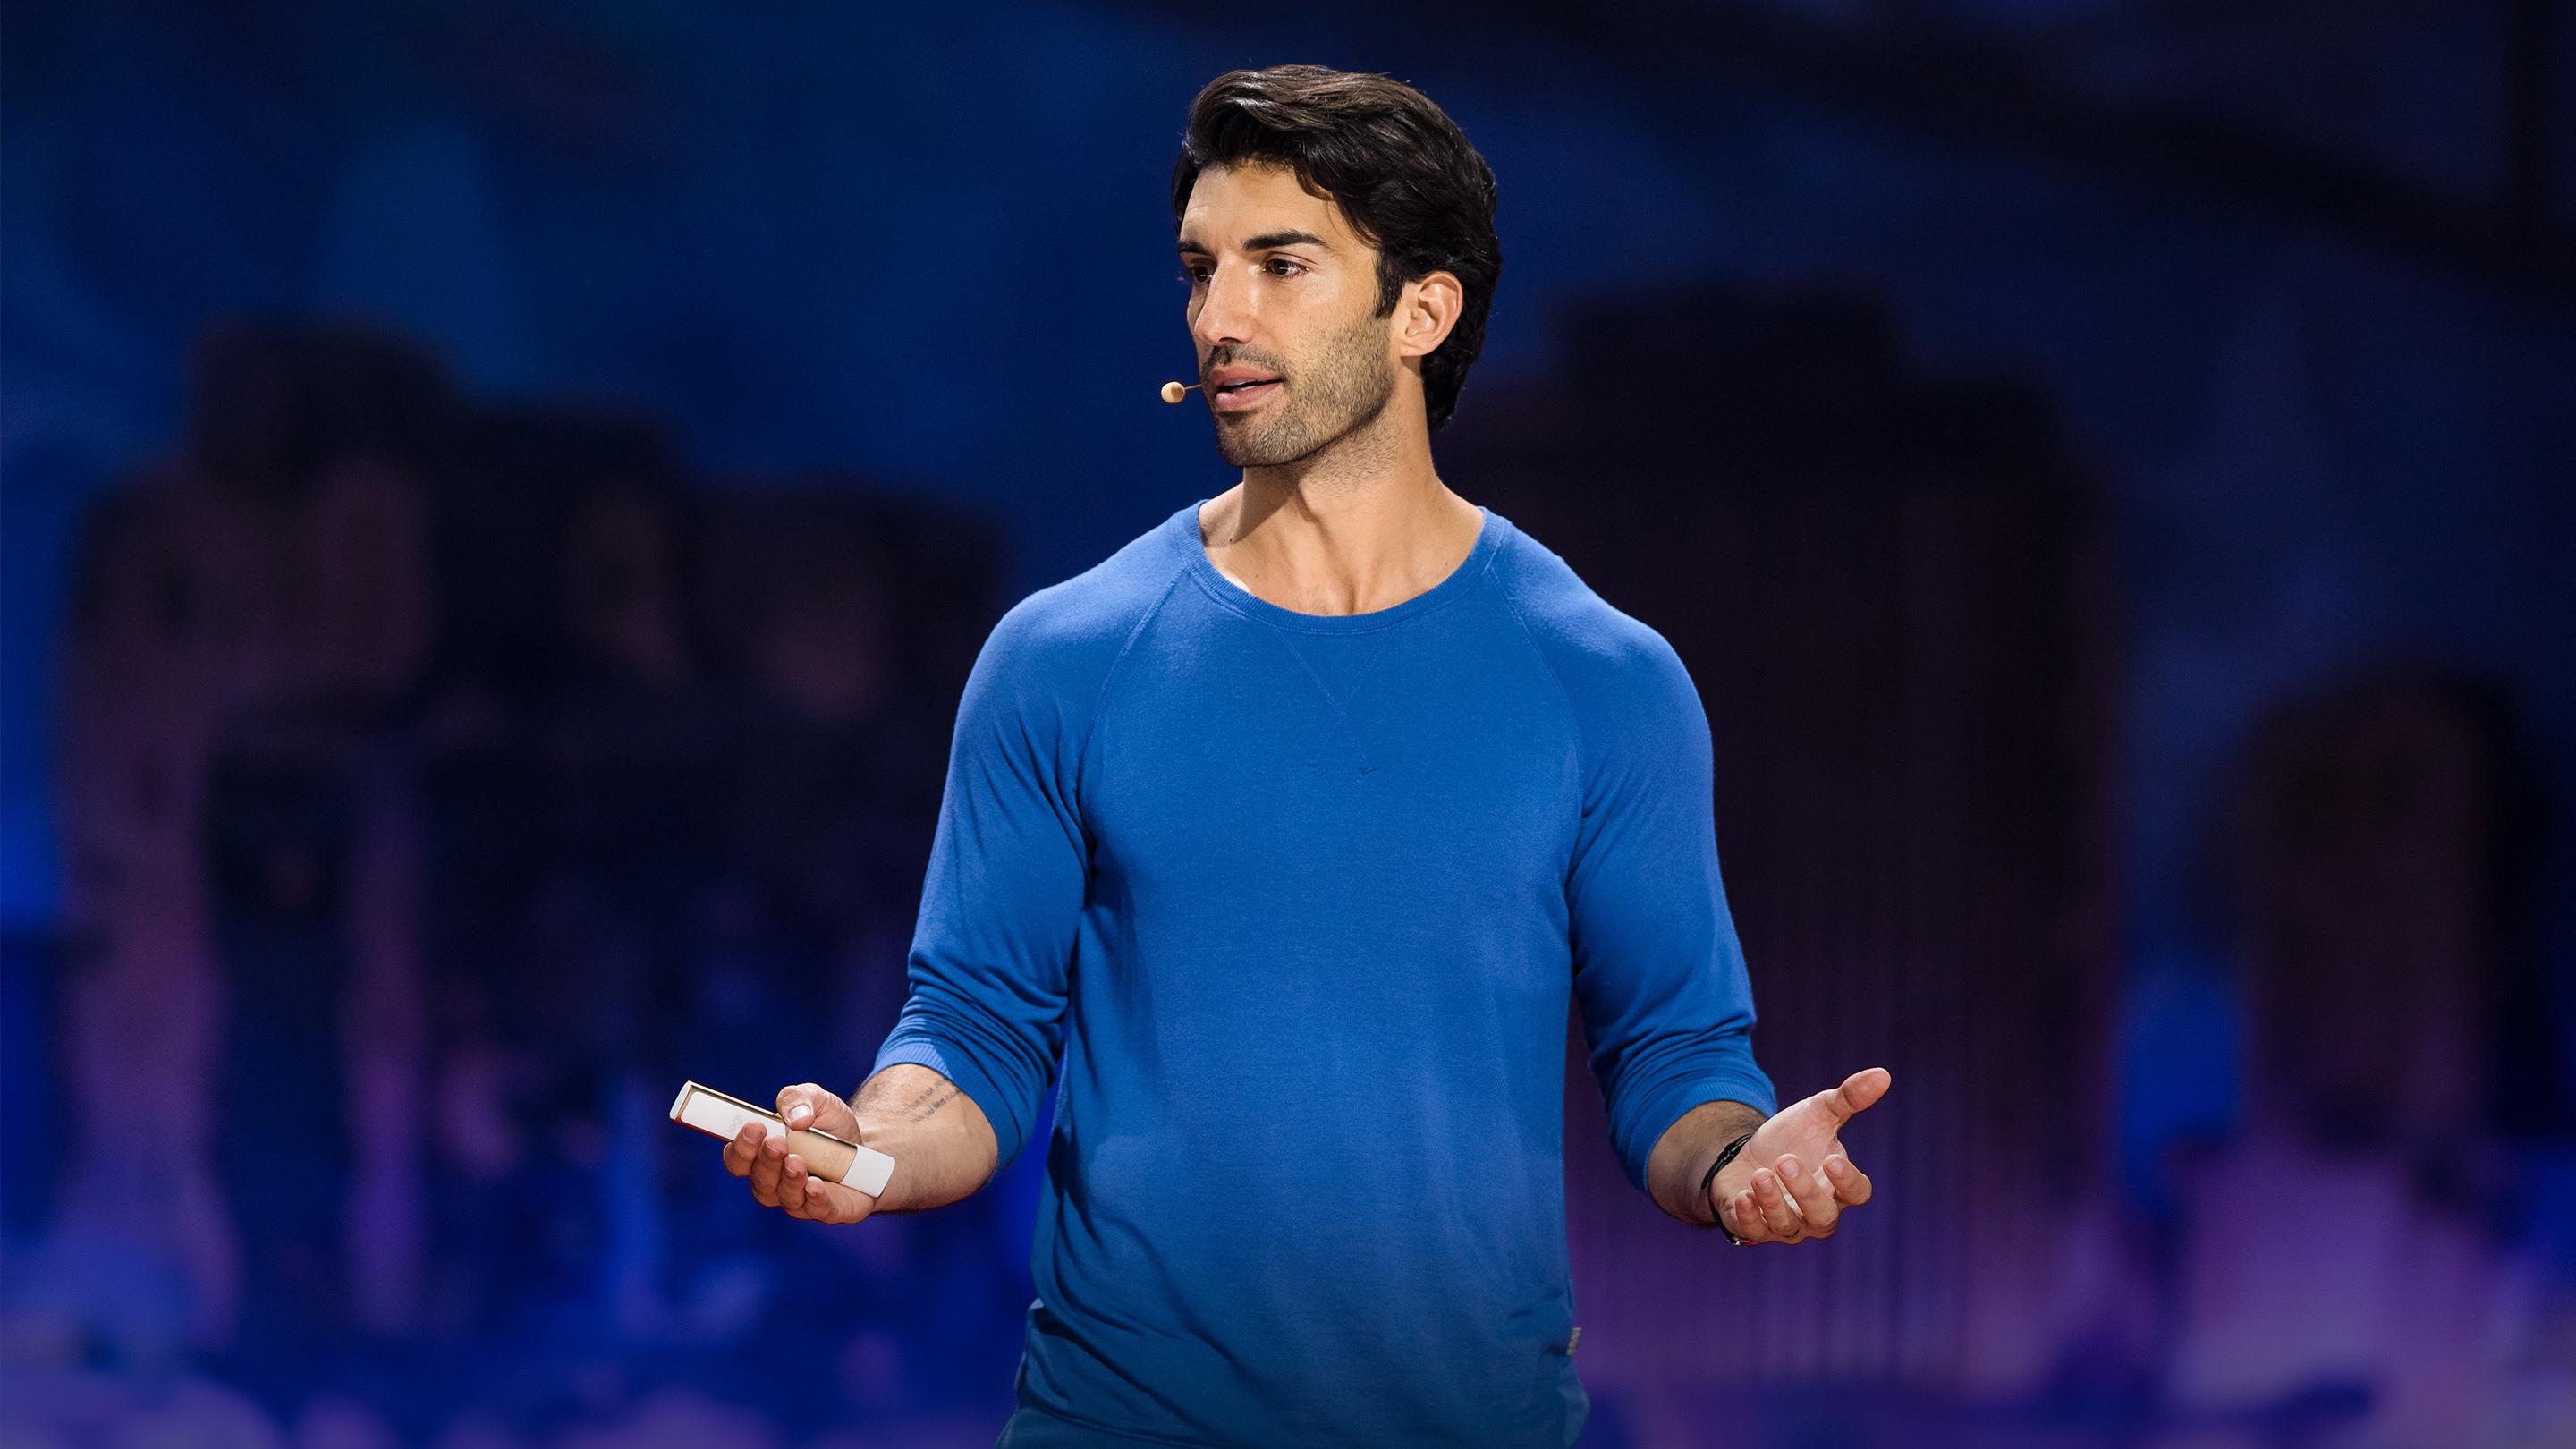 Why I’m done trying to be ”man enough” | Justin Baldoni